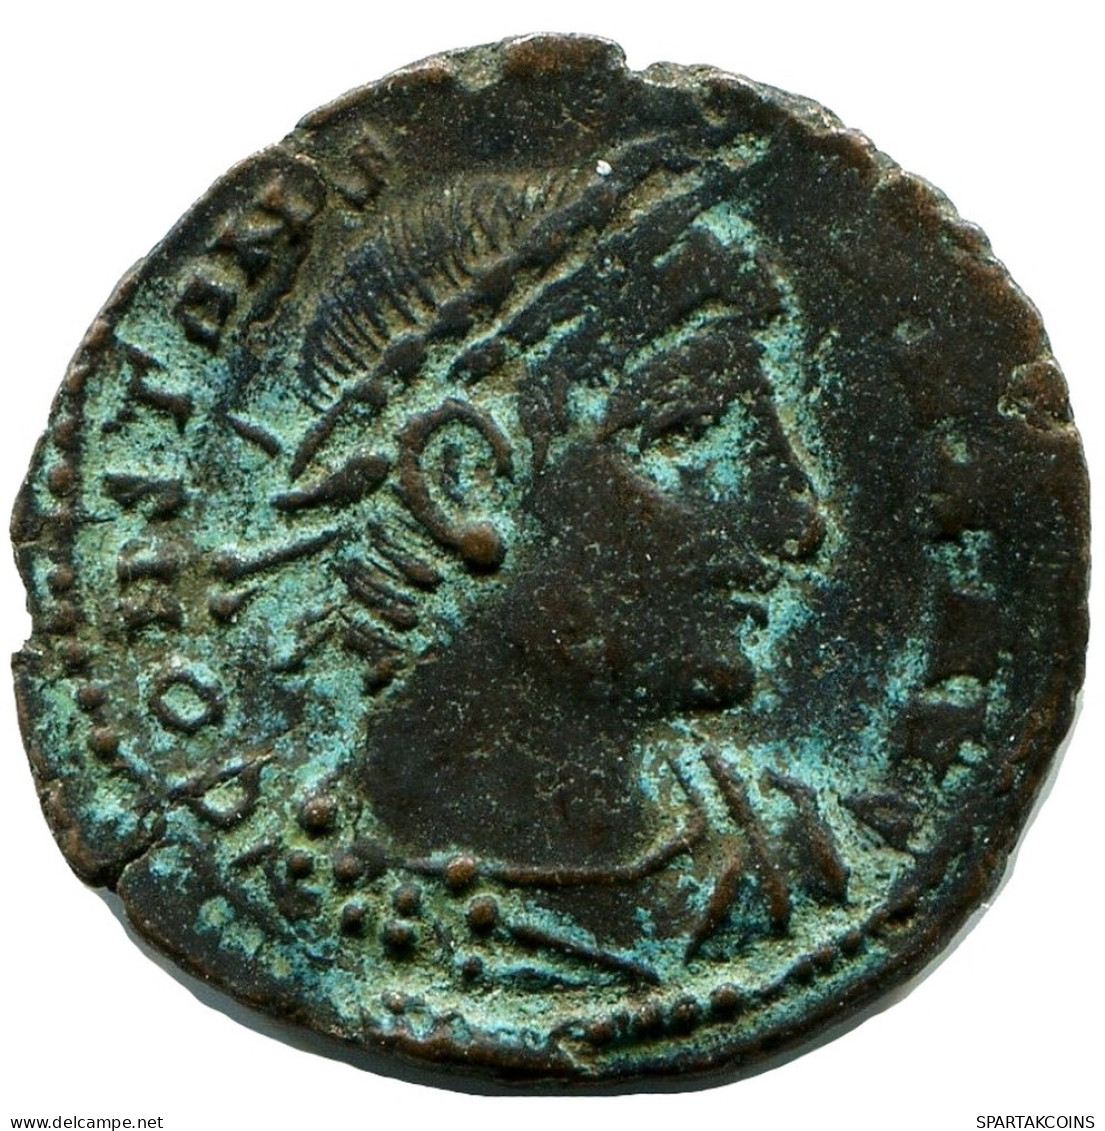 CONSTANS MINTED IN ALEKSANDRIA FROM THE ROYAL ONTARIO MUSEUM #ANC11426.14.D.A - The Christian Empire (307 AD Tot 363 AD)